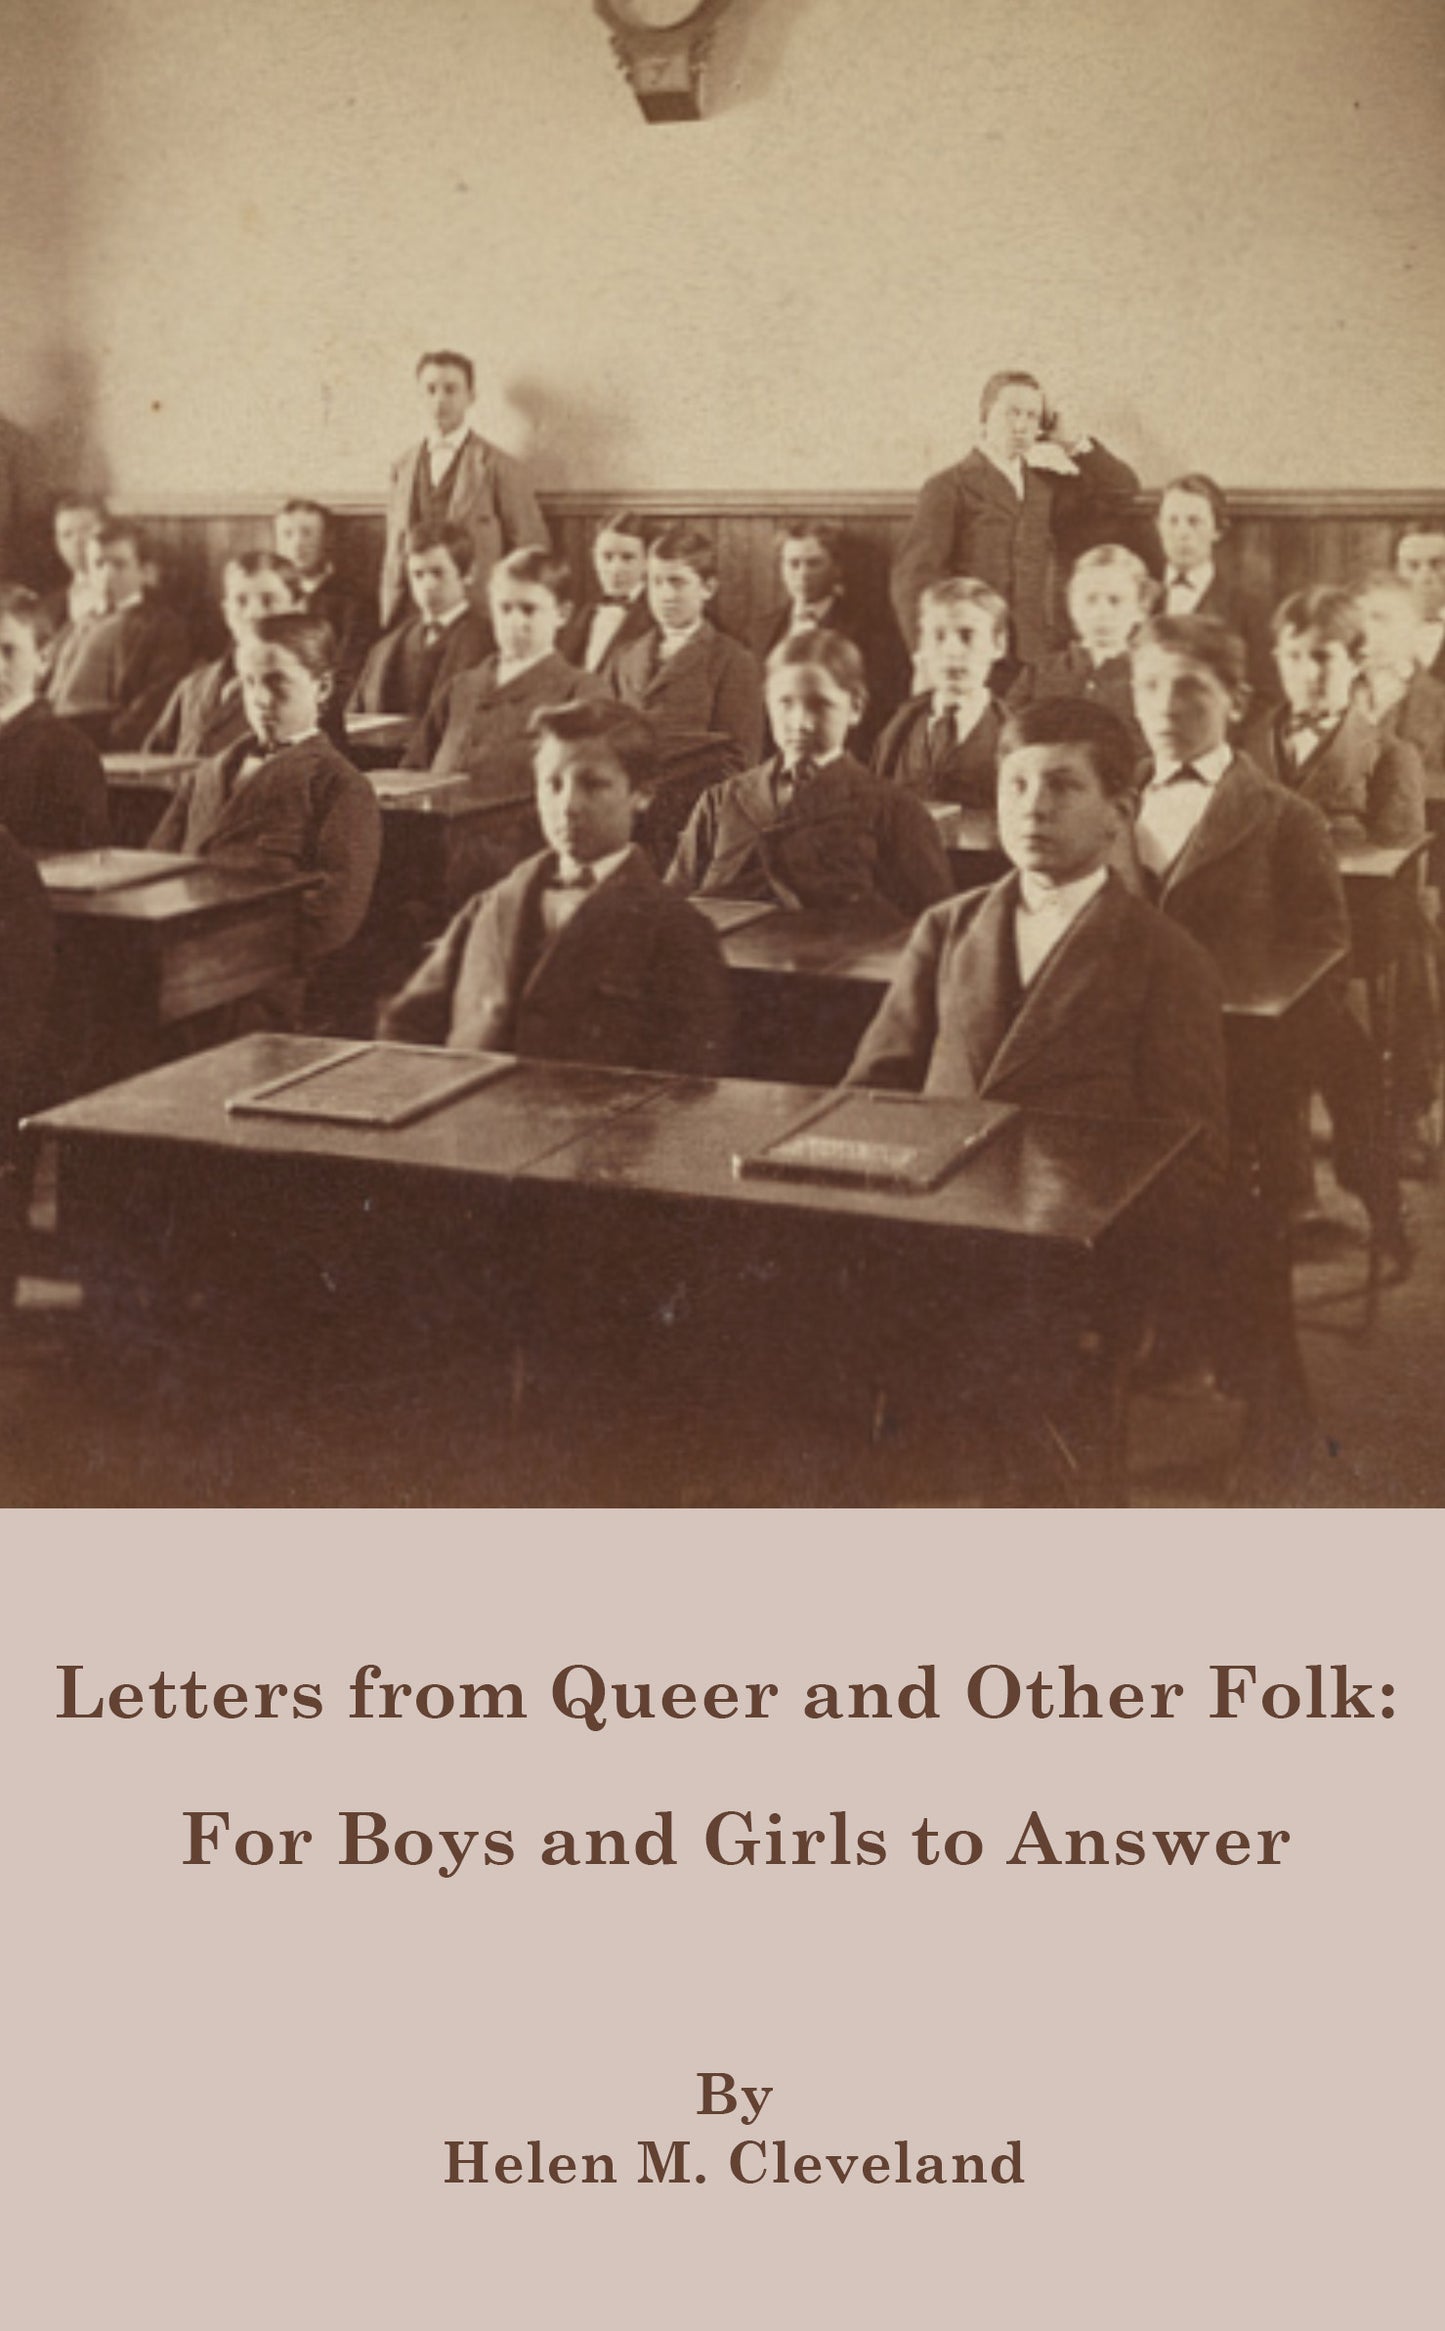 Letters from Queer and Other Folk: For Boys and Girls to Answer